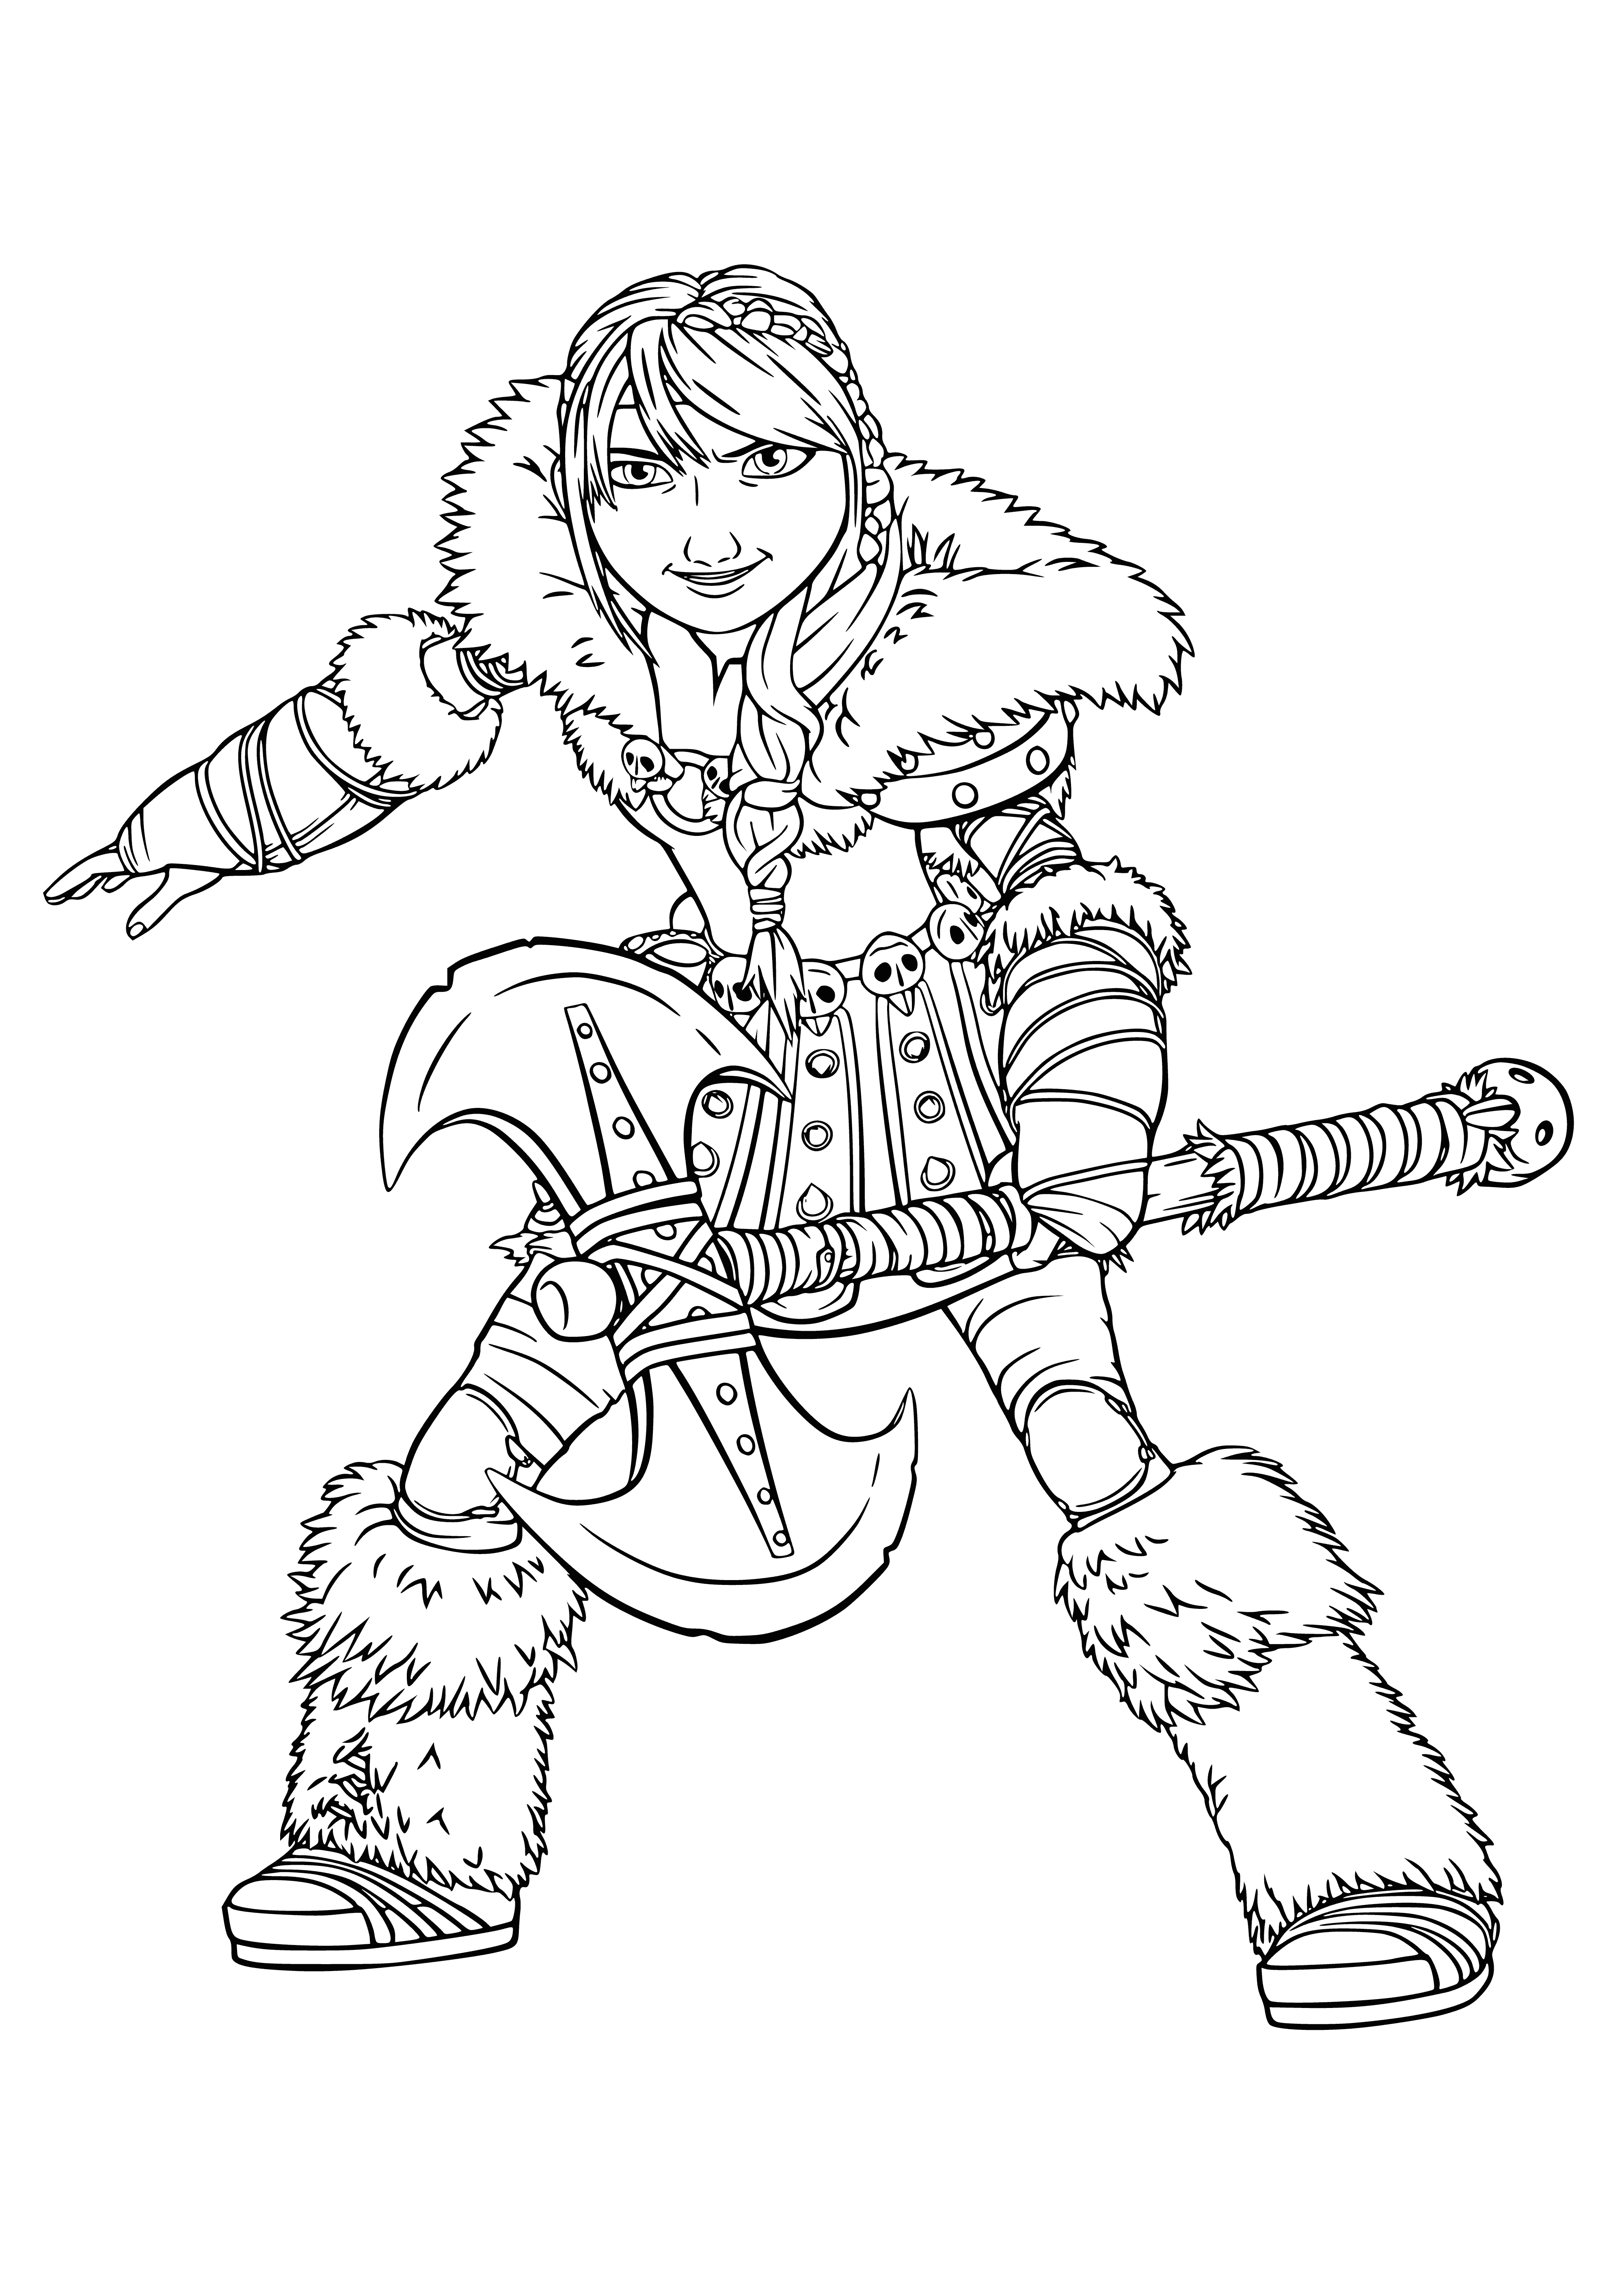 coloring page: Astrid stands tall, cloak of fur, blue eyes piercing, holding a spear and shield. Behind her, a dragon with green scales and red wings.